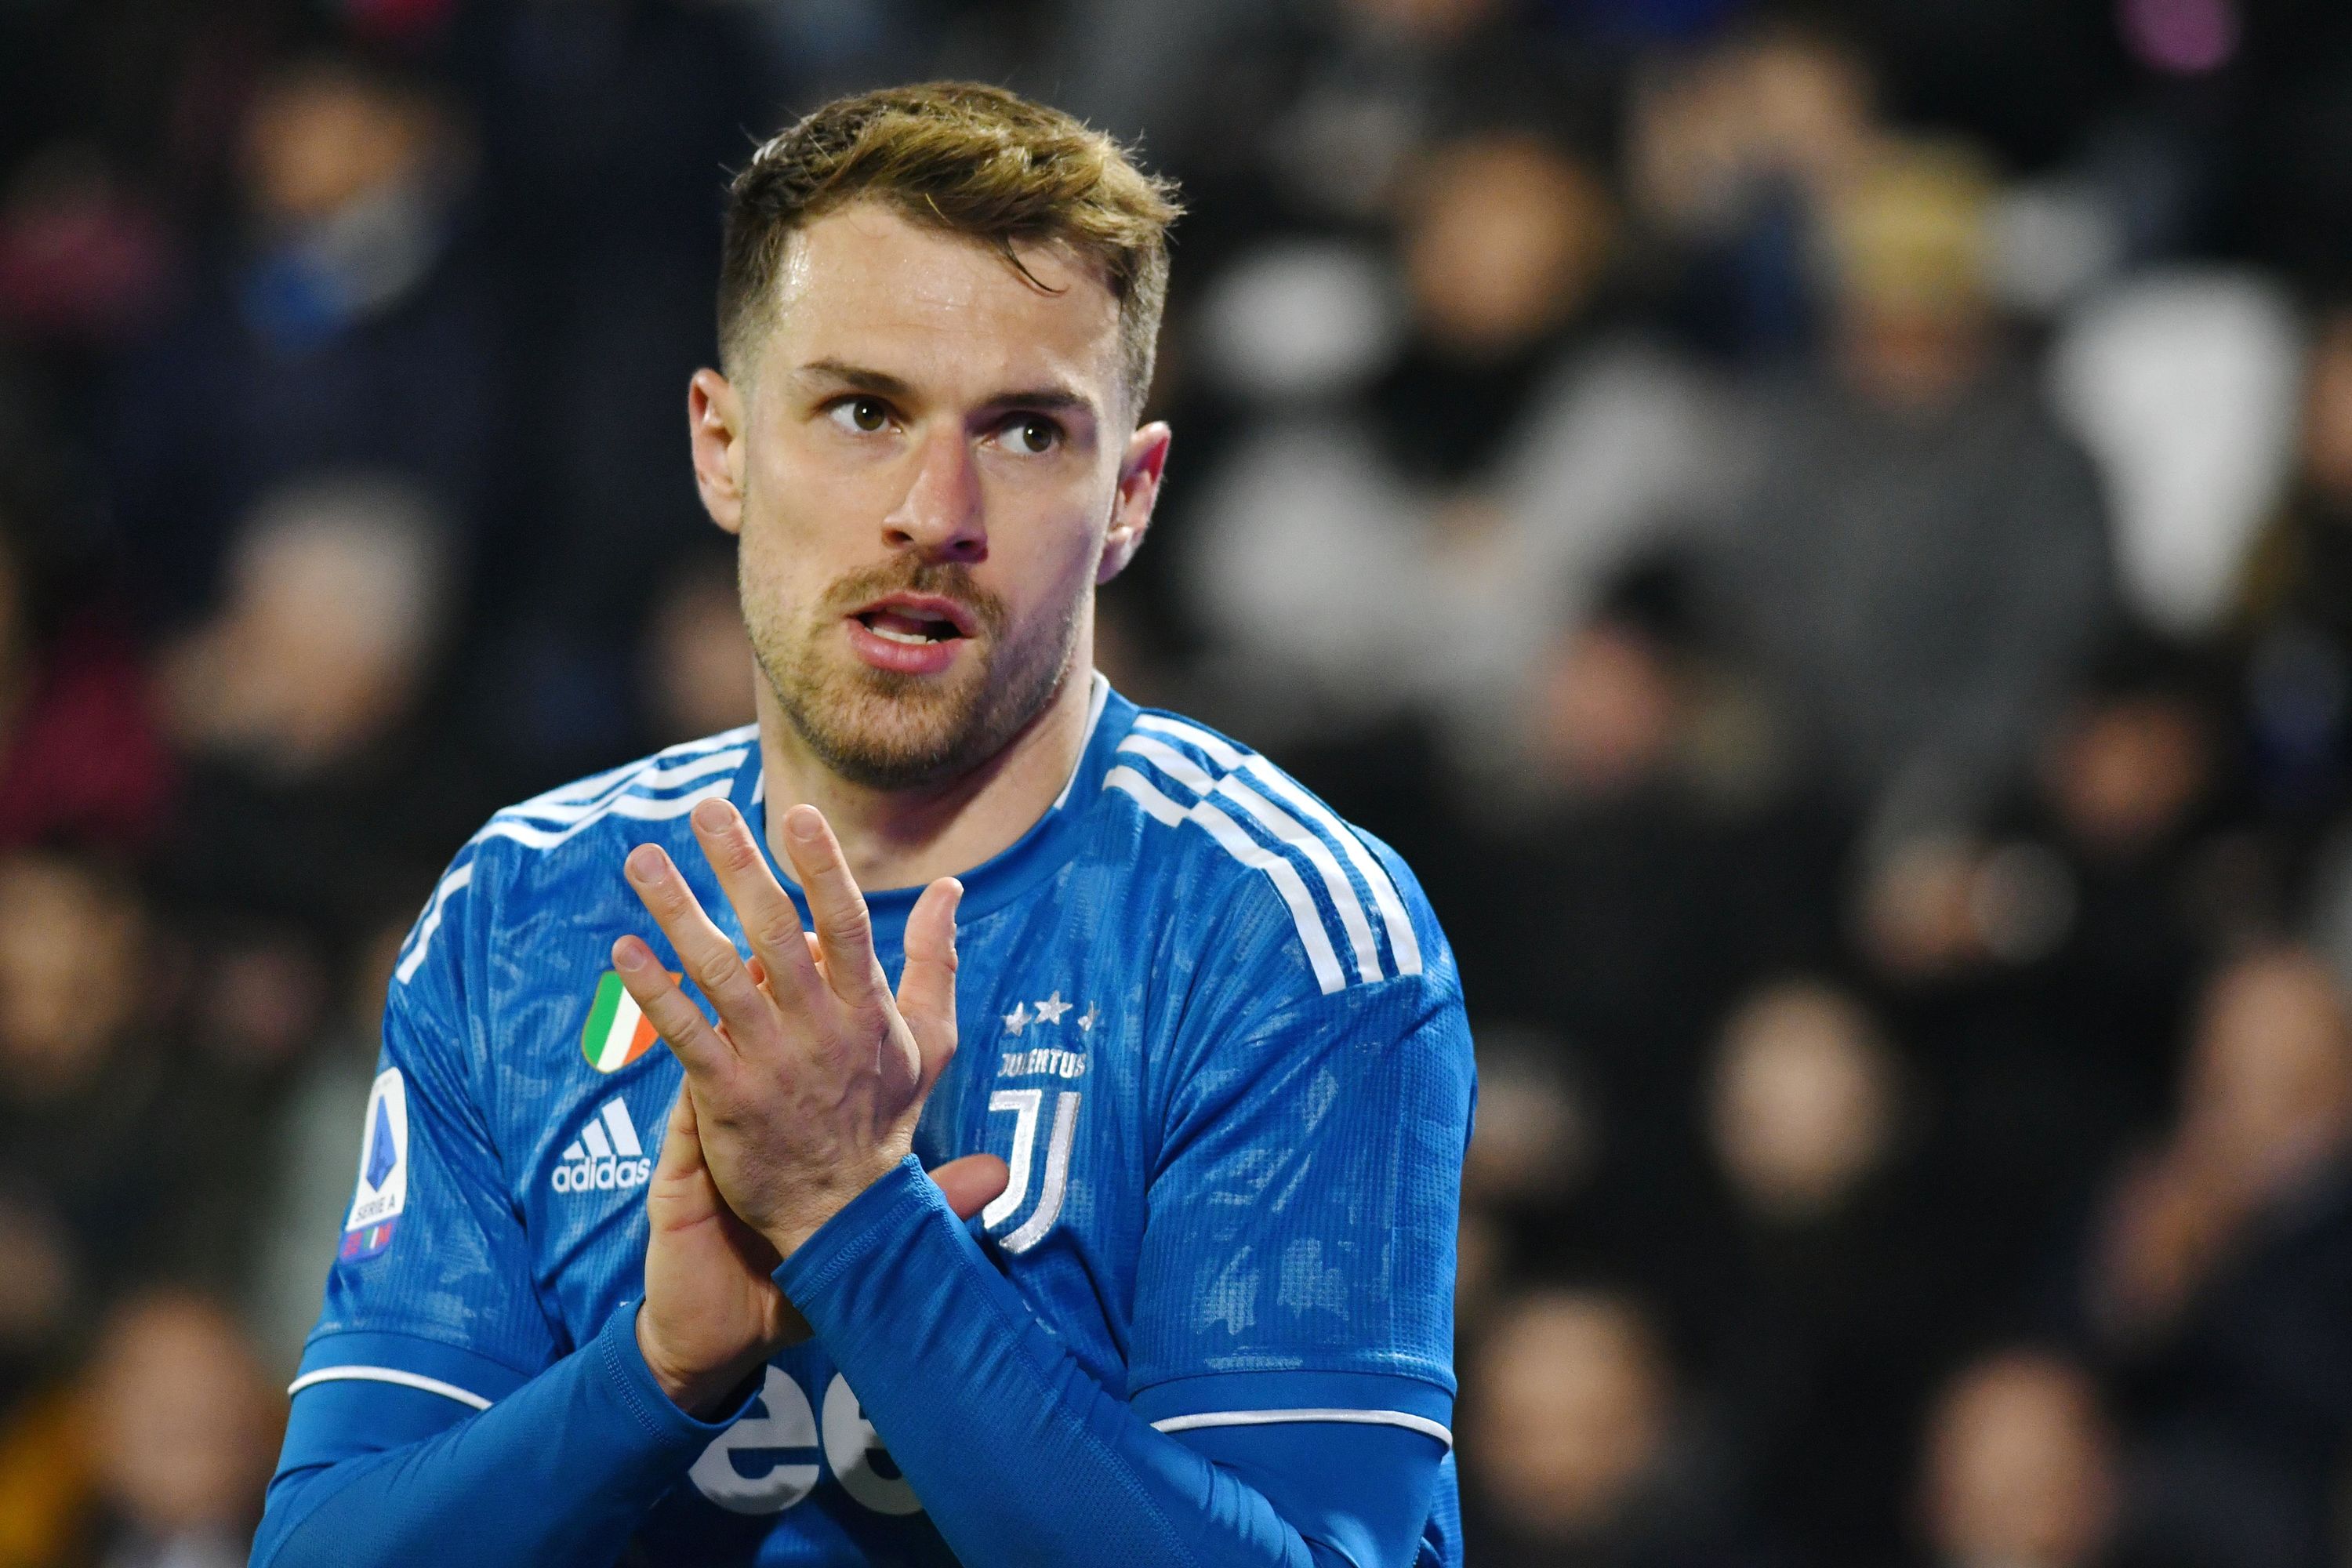 Arsenal transfer rumour round-up: Ramsey unlikely to return as Vlahovic bid confirmed 